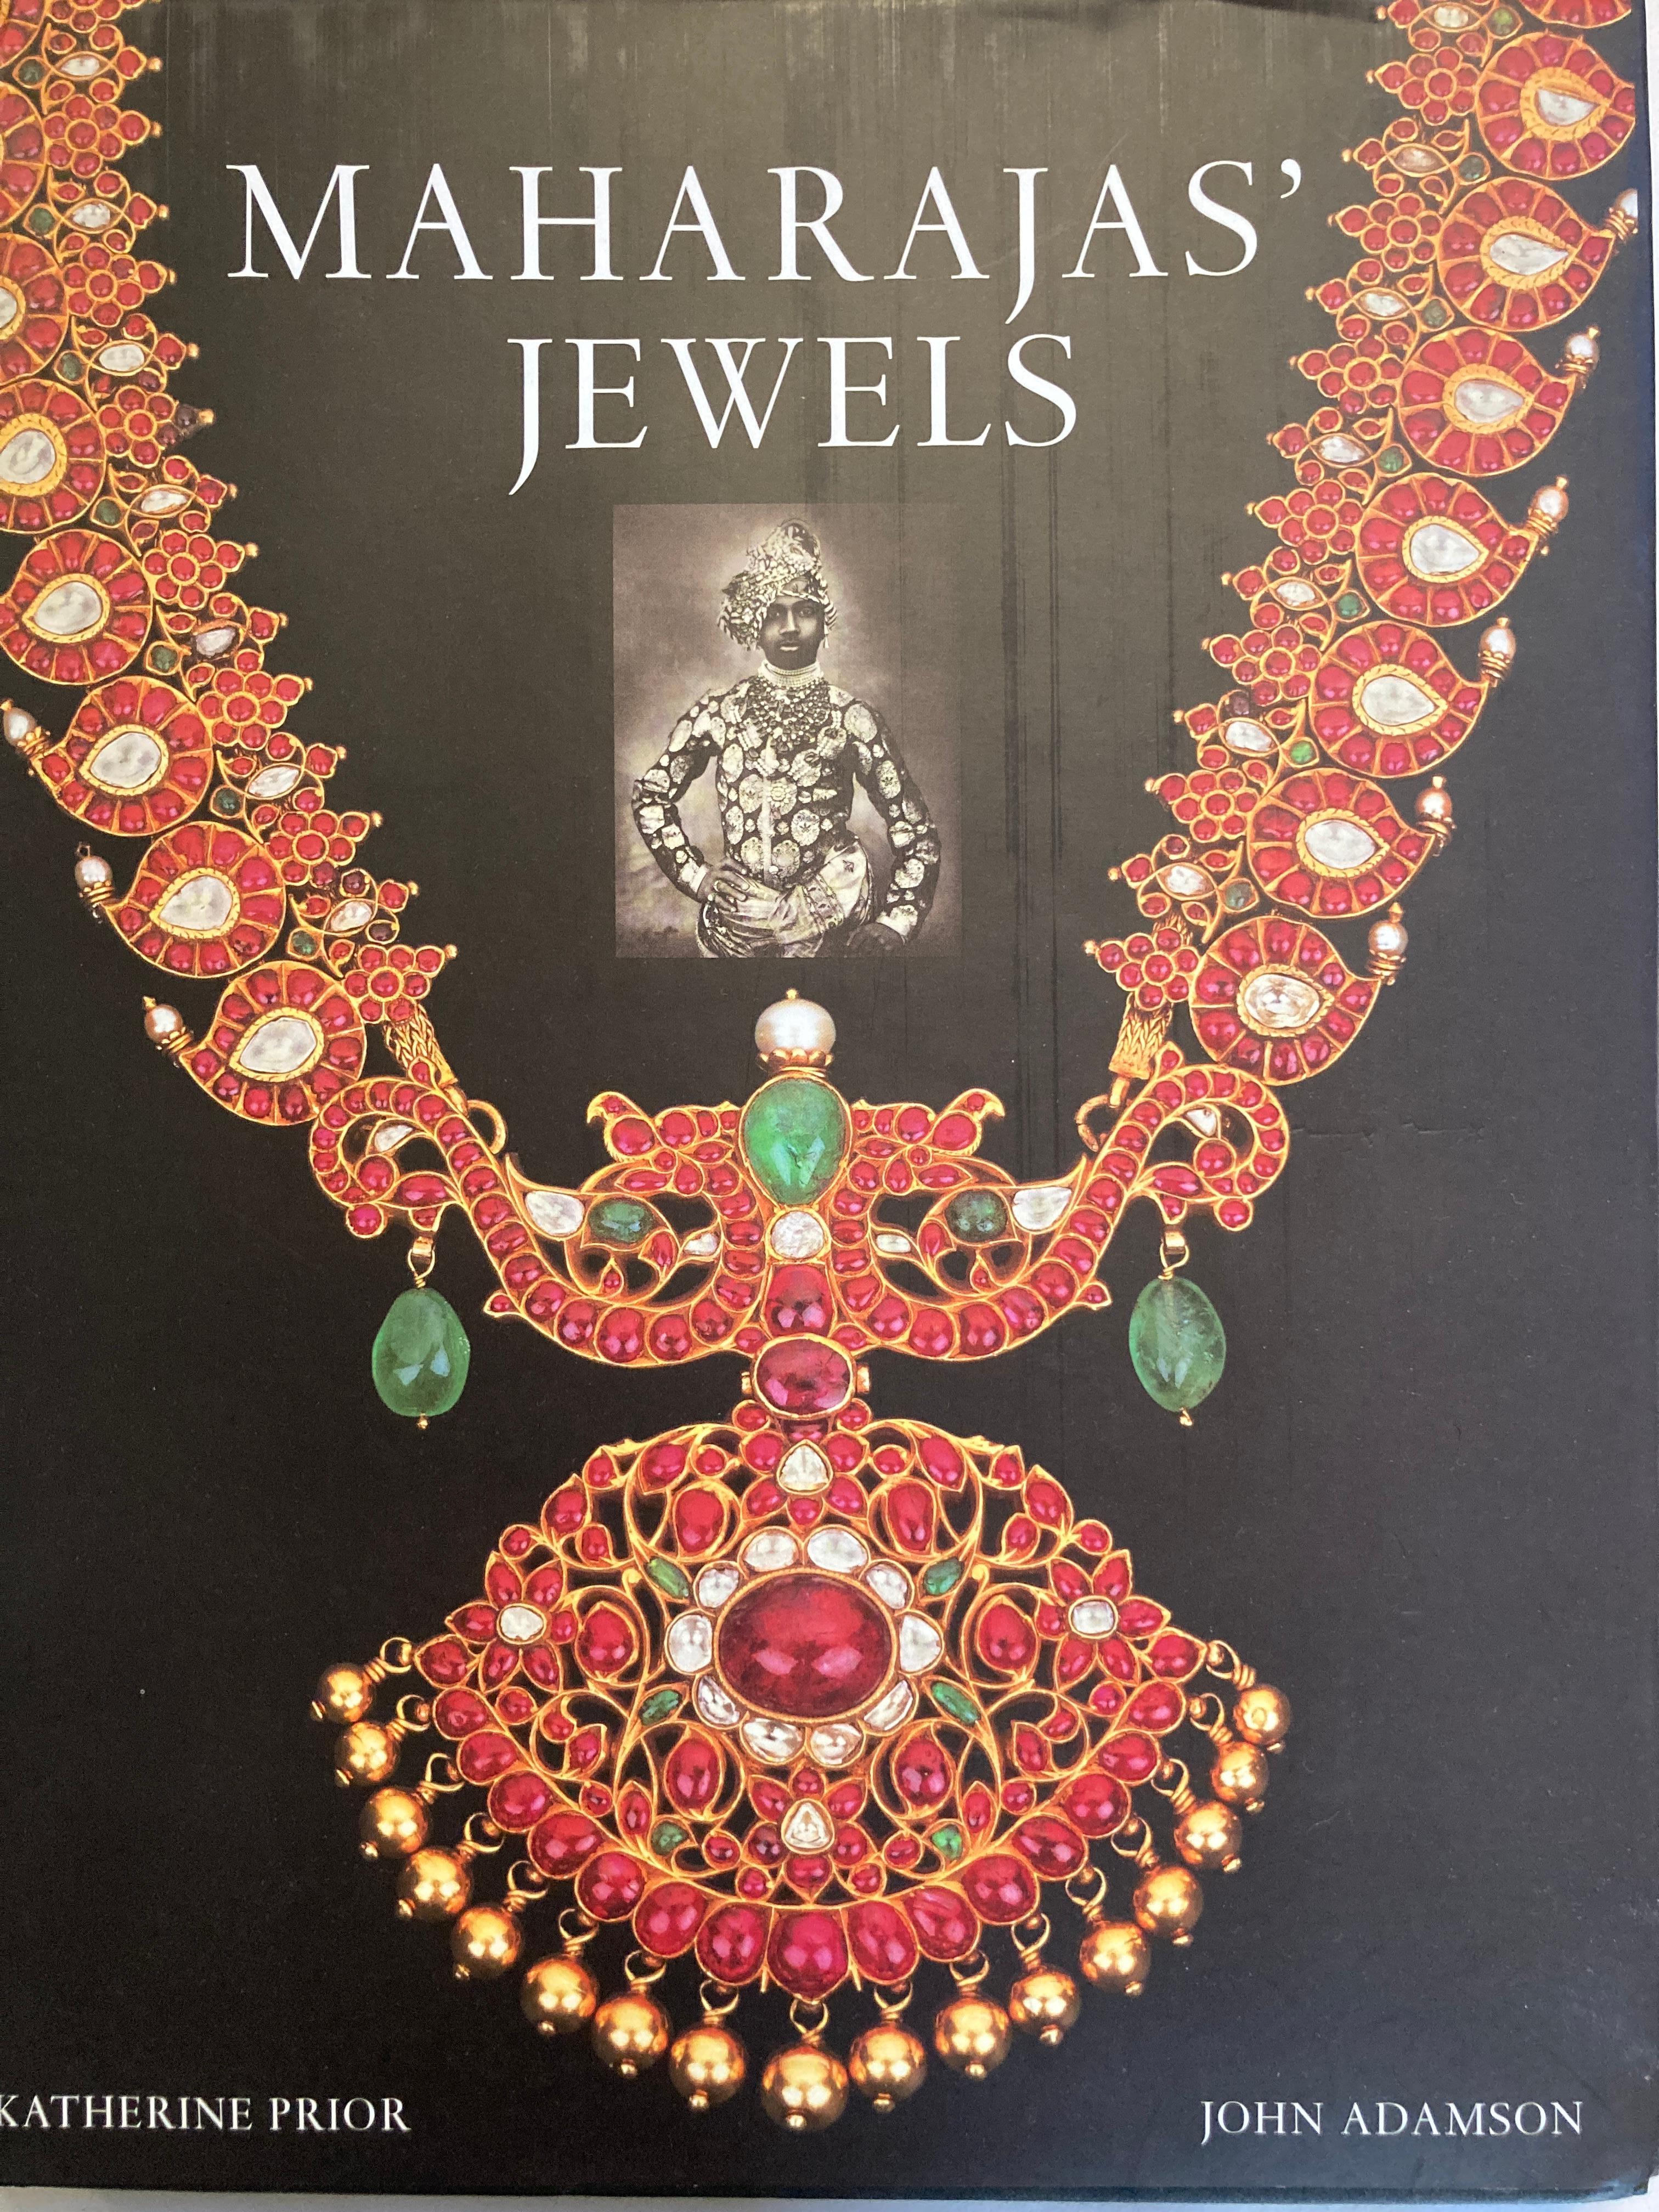 The stories of Indian princes and their jewelry and precious stones are brought together in this illustrated narrative tracing the rise and fall of India's leading royal houses through the dramatic fortunes of their crown jewels. 
Traditionally,